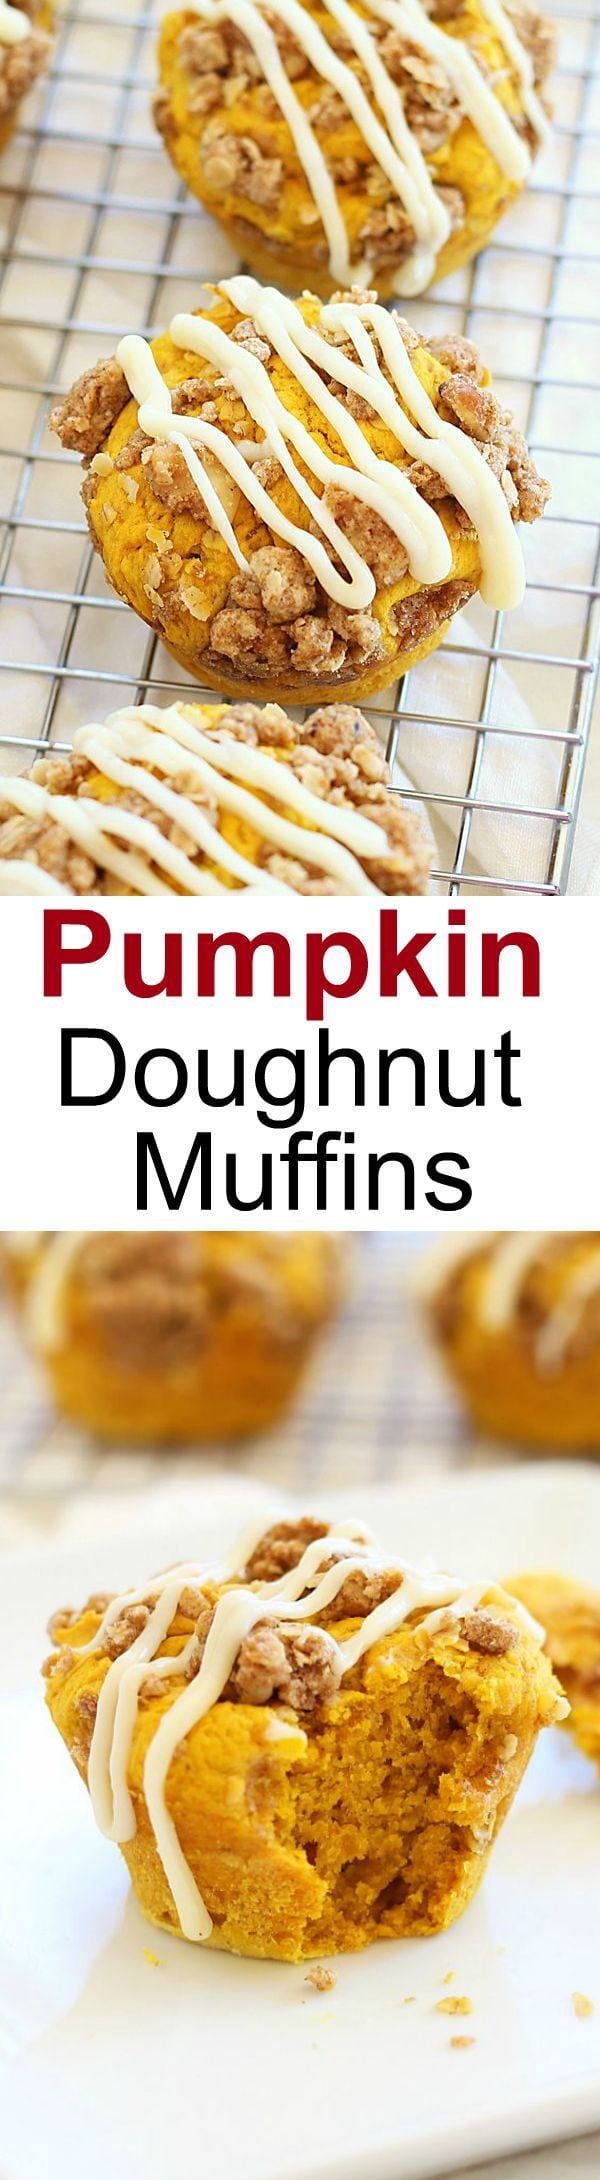 Pumpkin Doughnut Muffins – amazing muffins topped with cream cheese icing over a sweetened crumble. Easy recipe and fail-proof recipe! | rasamalaysia.com